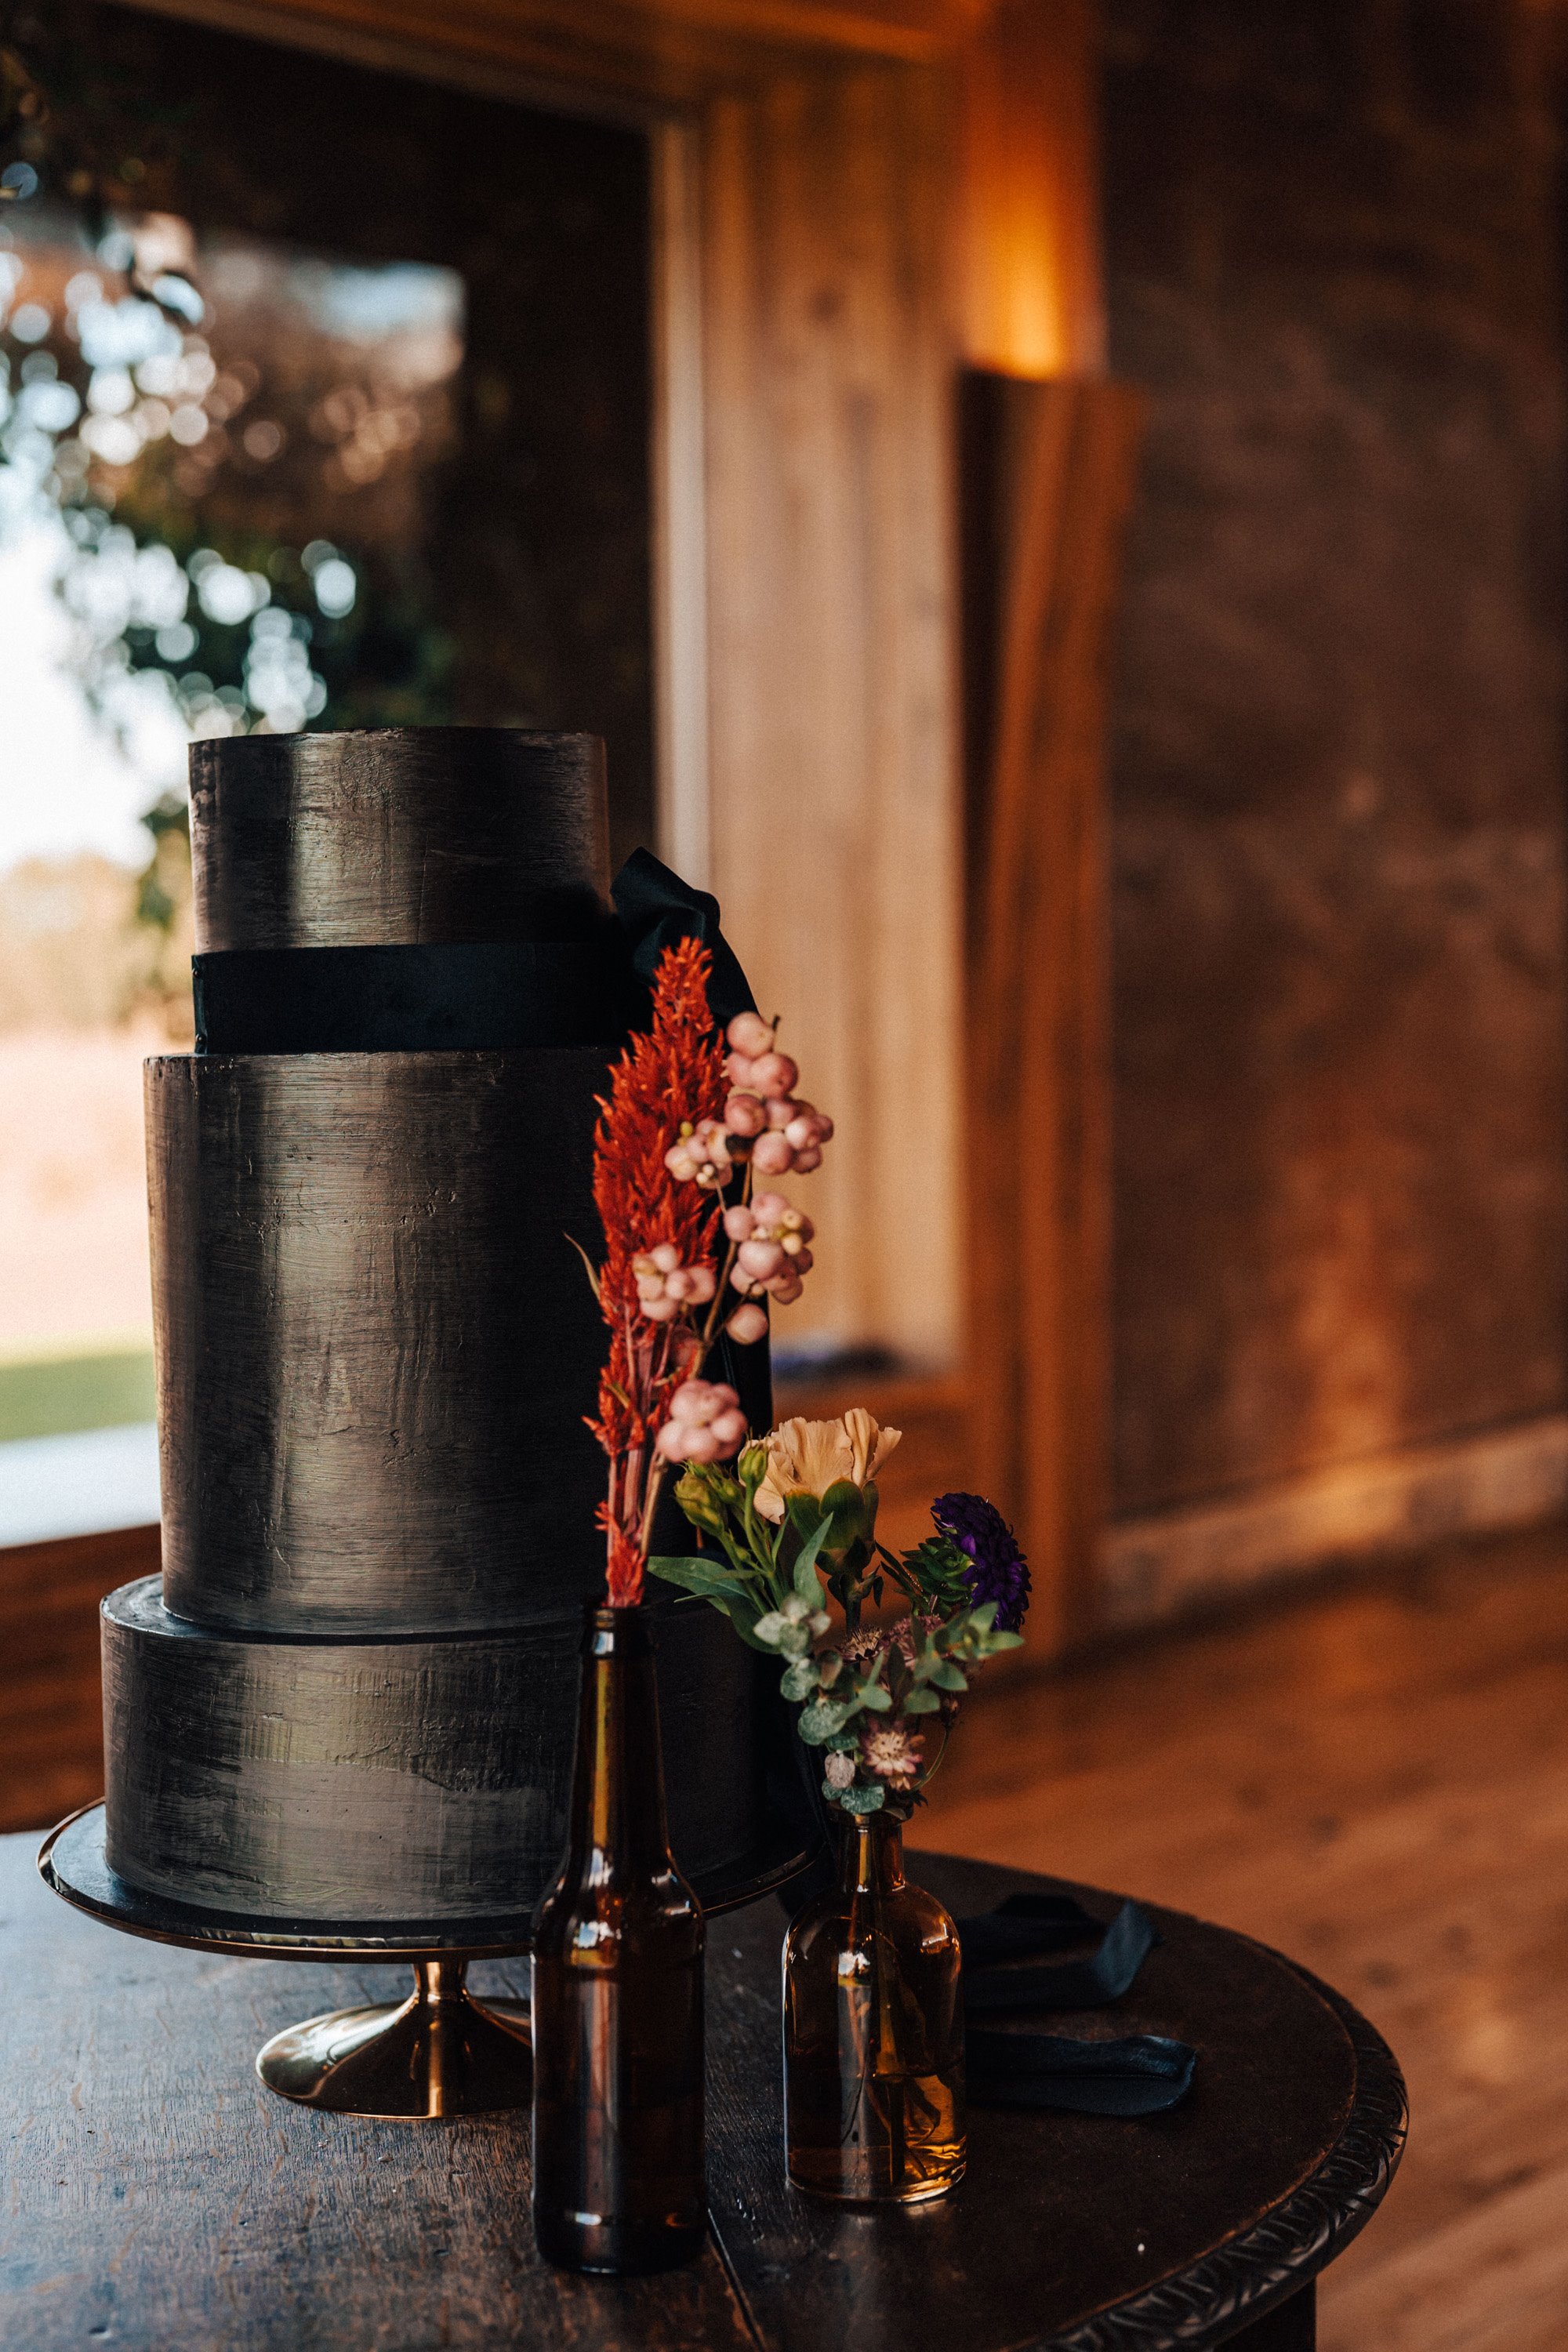 Black wedding cake for a black wedding theme close to halloween in october at a sustainable wedding venue in the english countryside